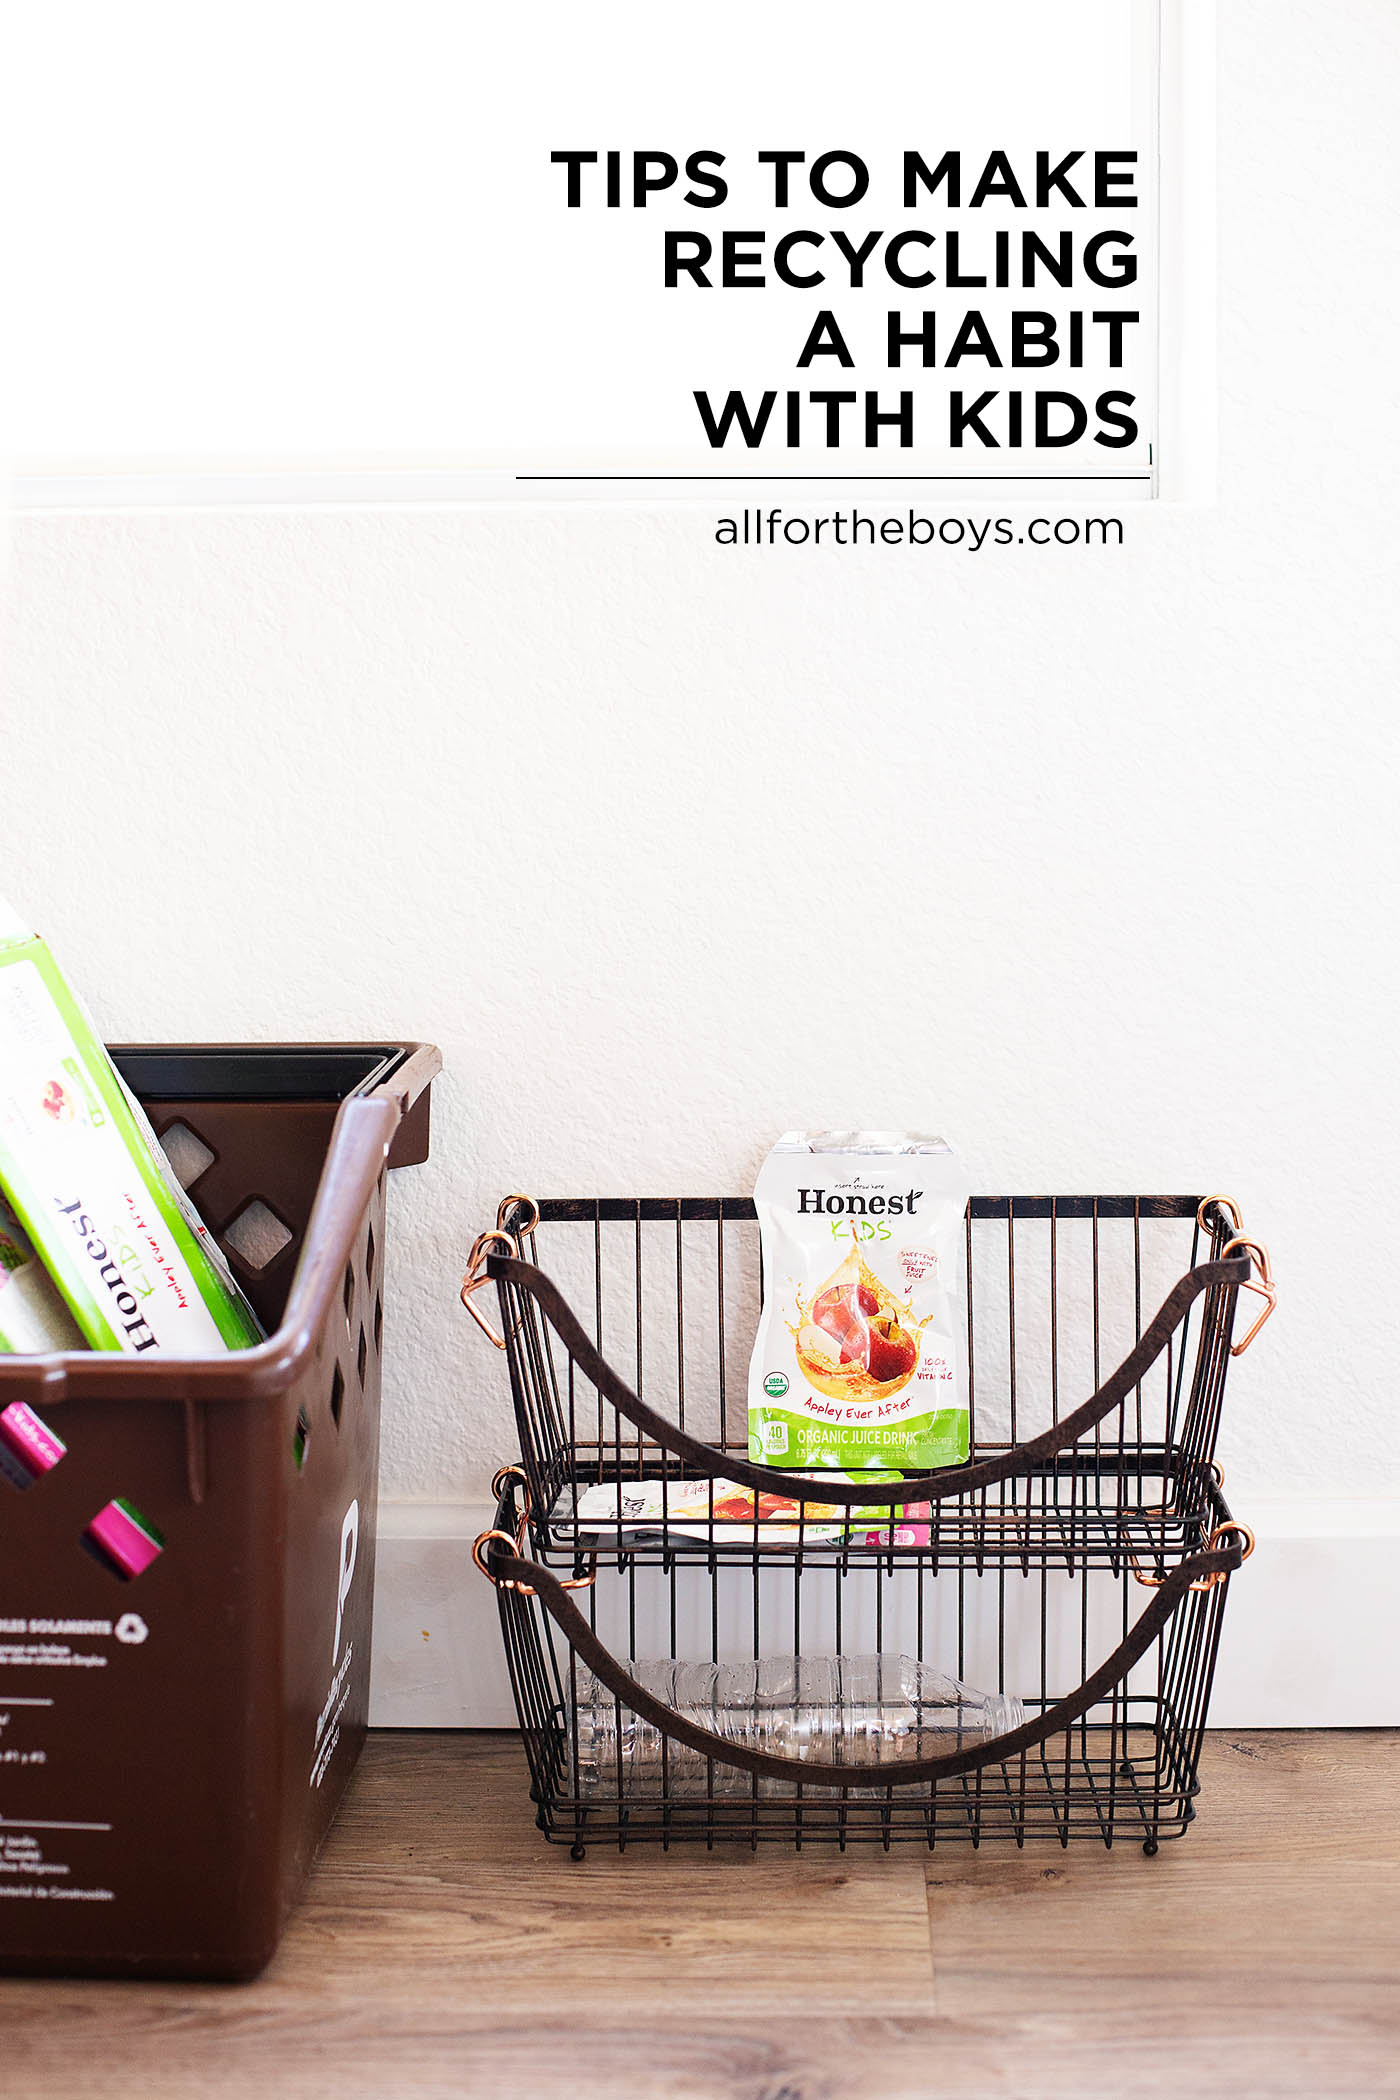 Tips for making recycling a habit with kids